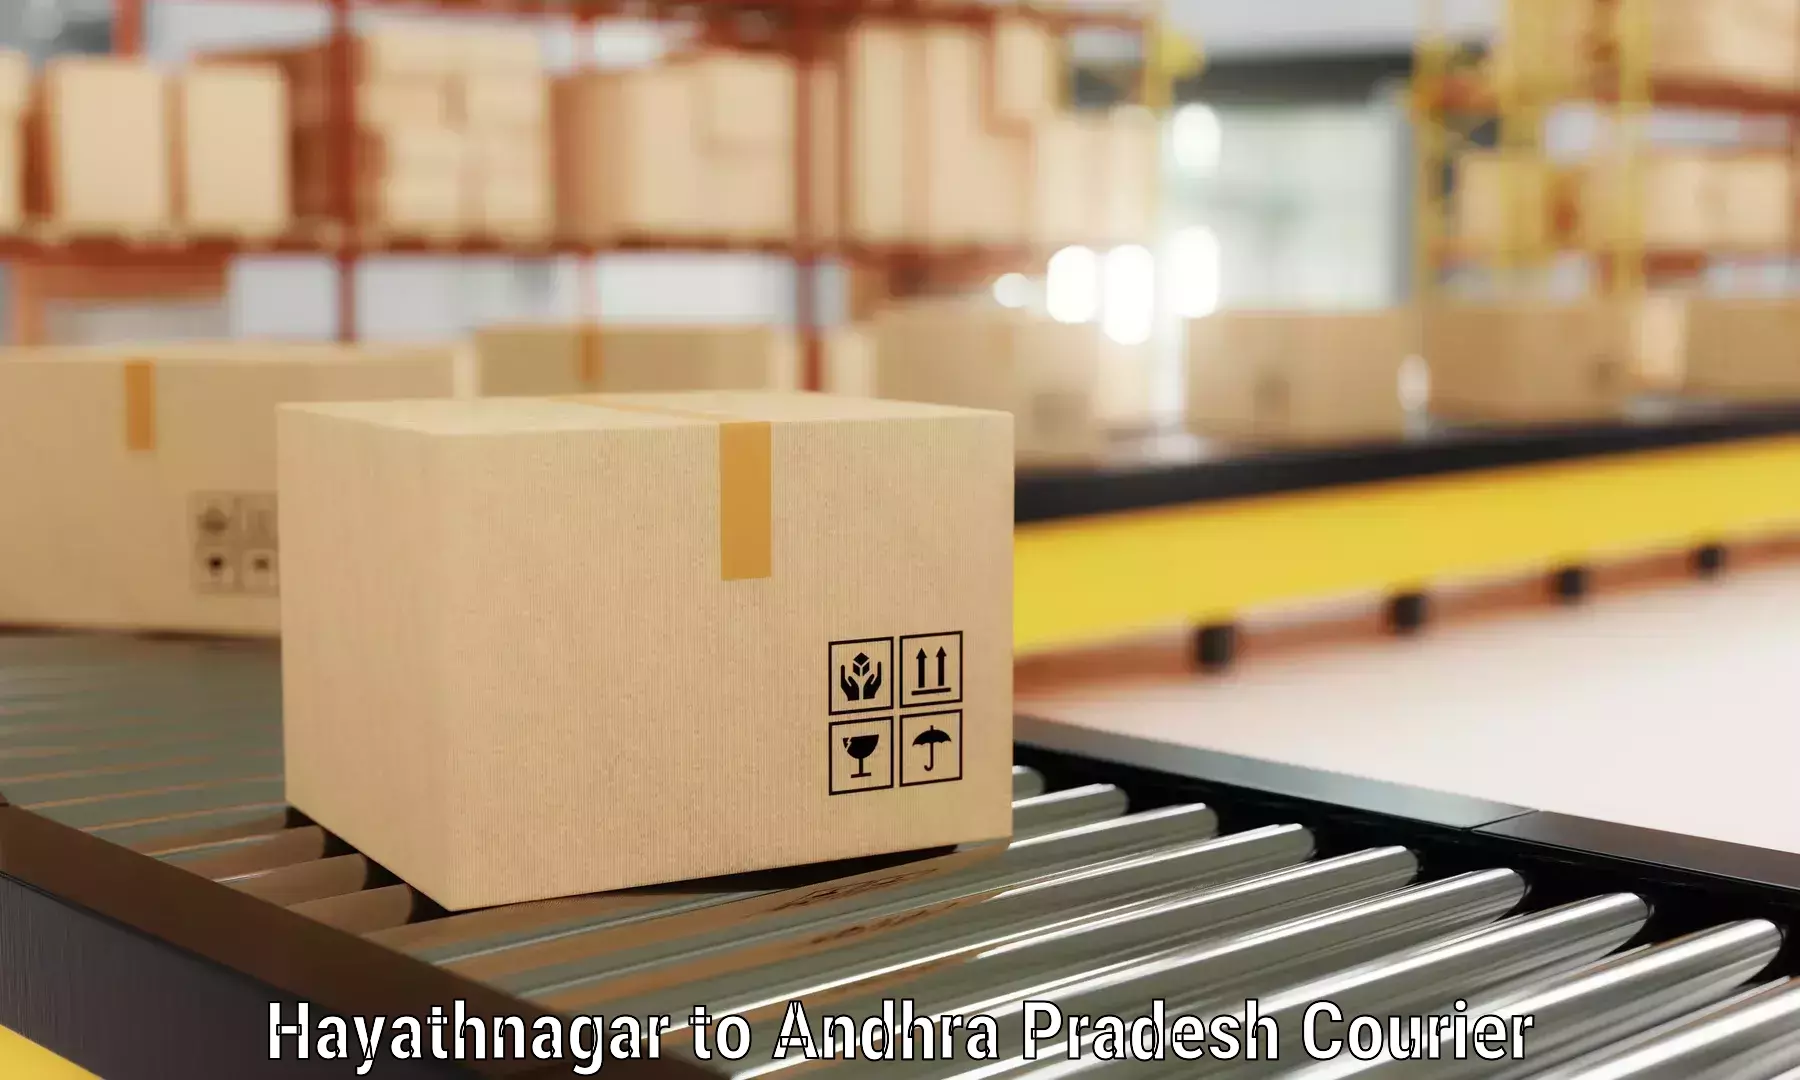 Moving and storage services Hayathnagar to Challapalli